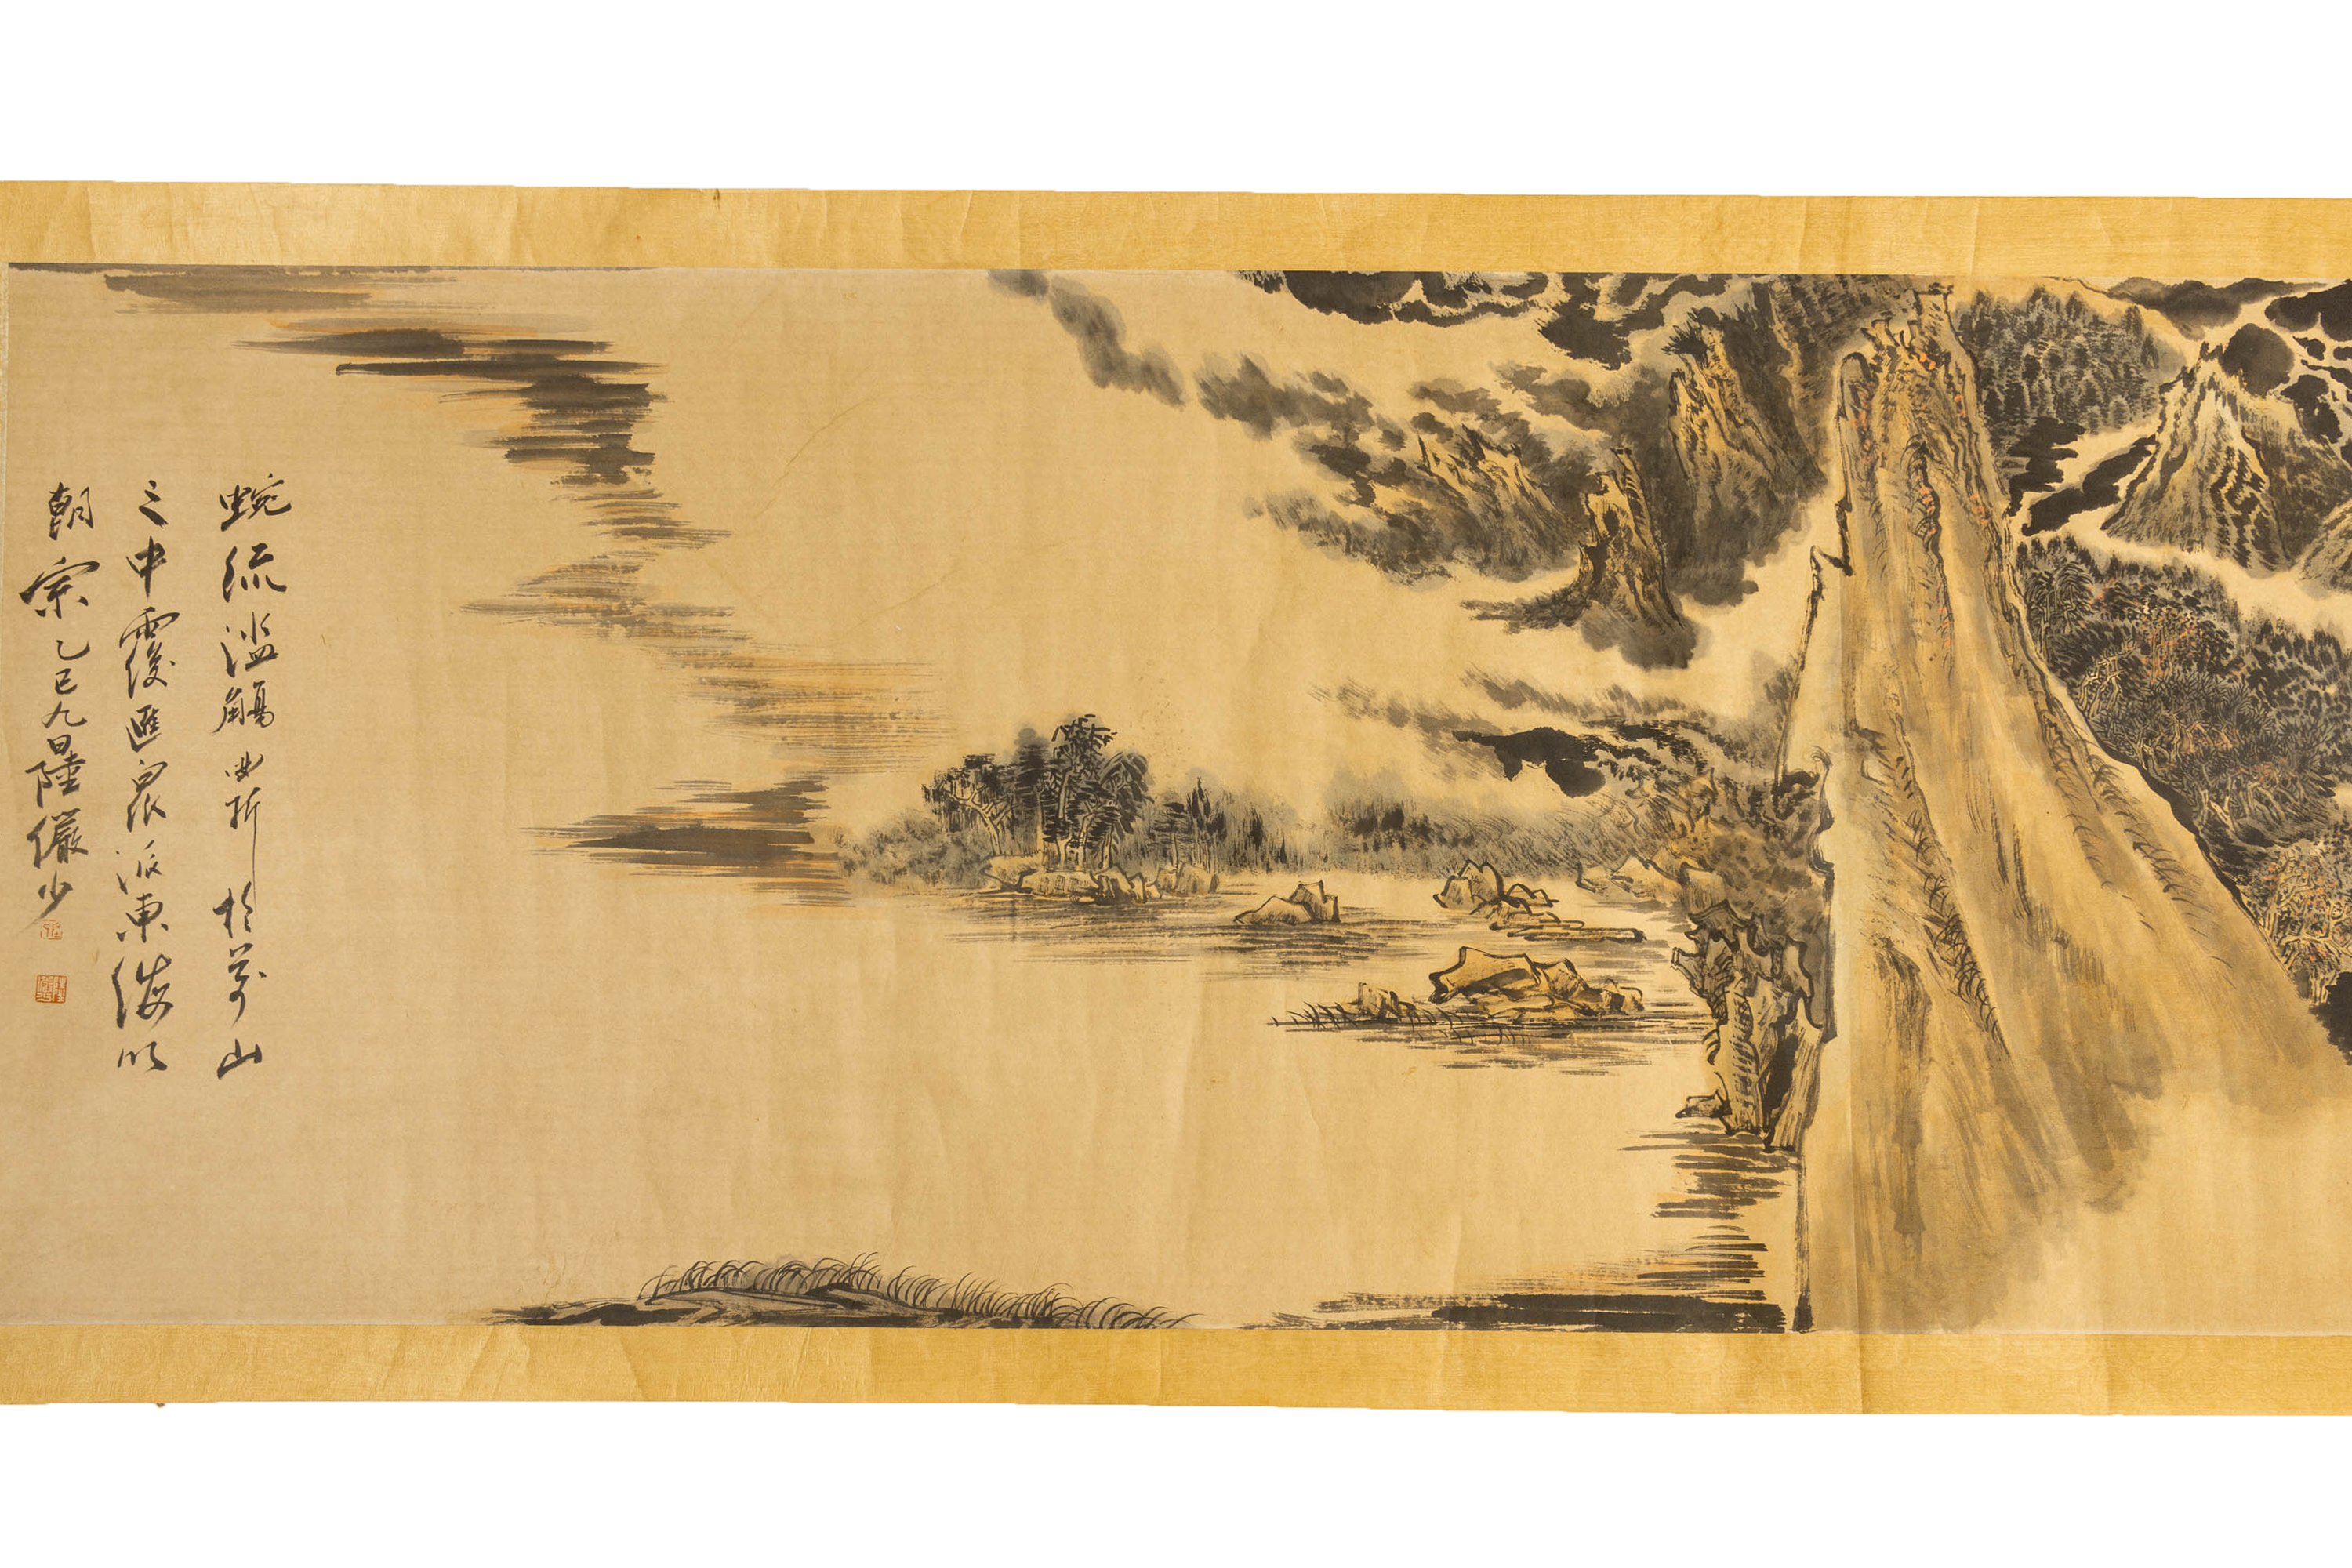 A VERY LONG CHINESE LANDSCAPE SCROLL